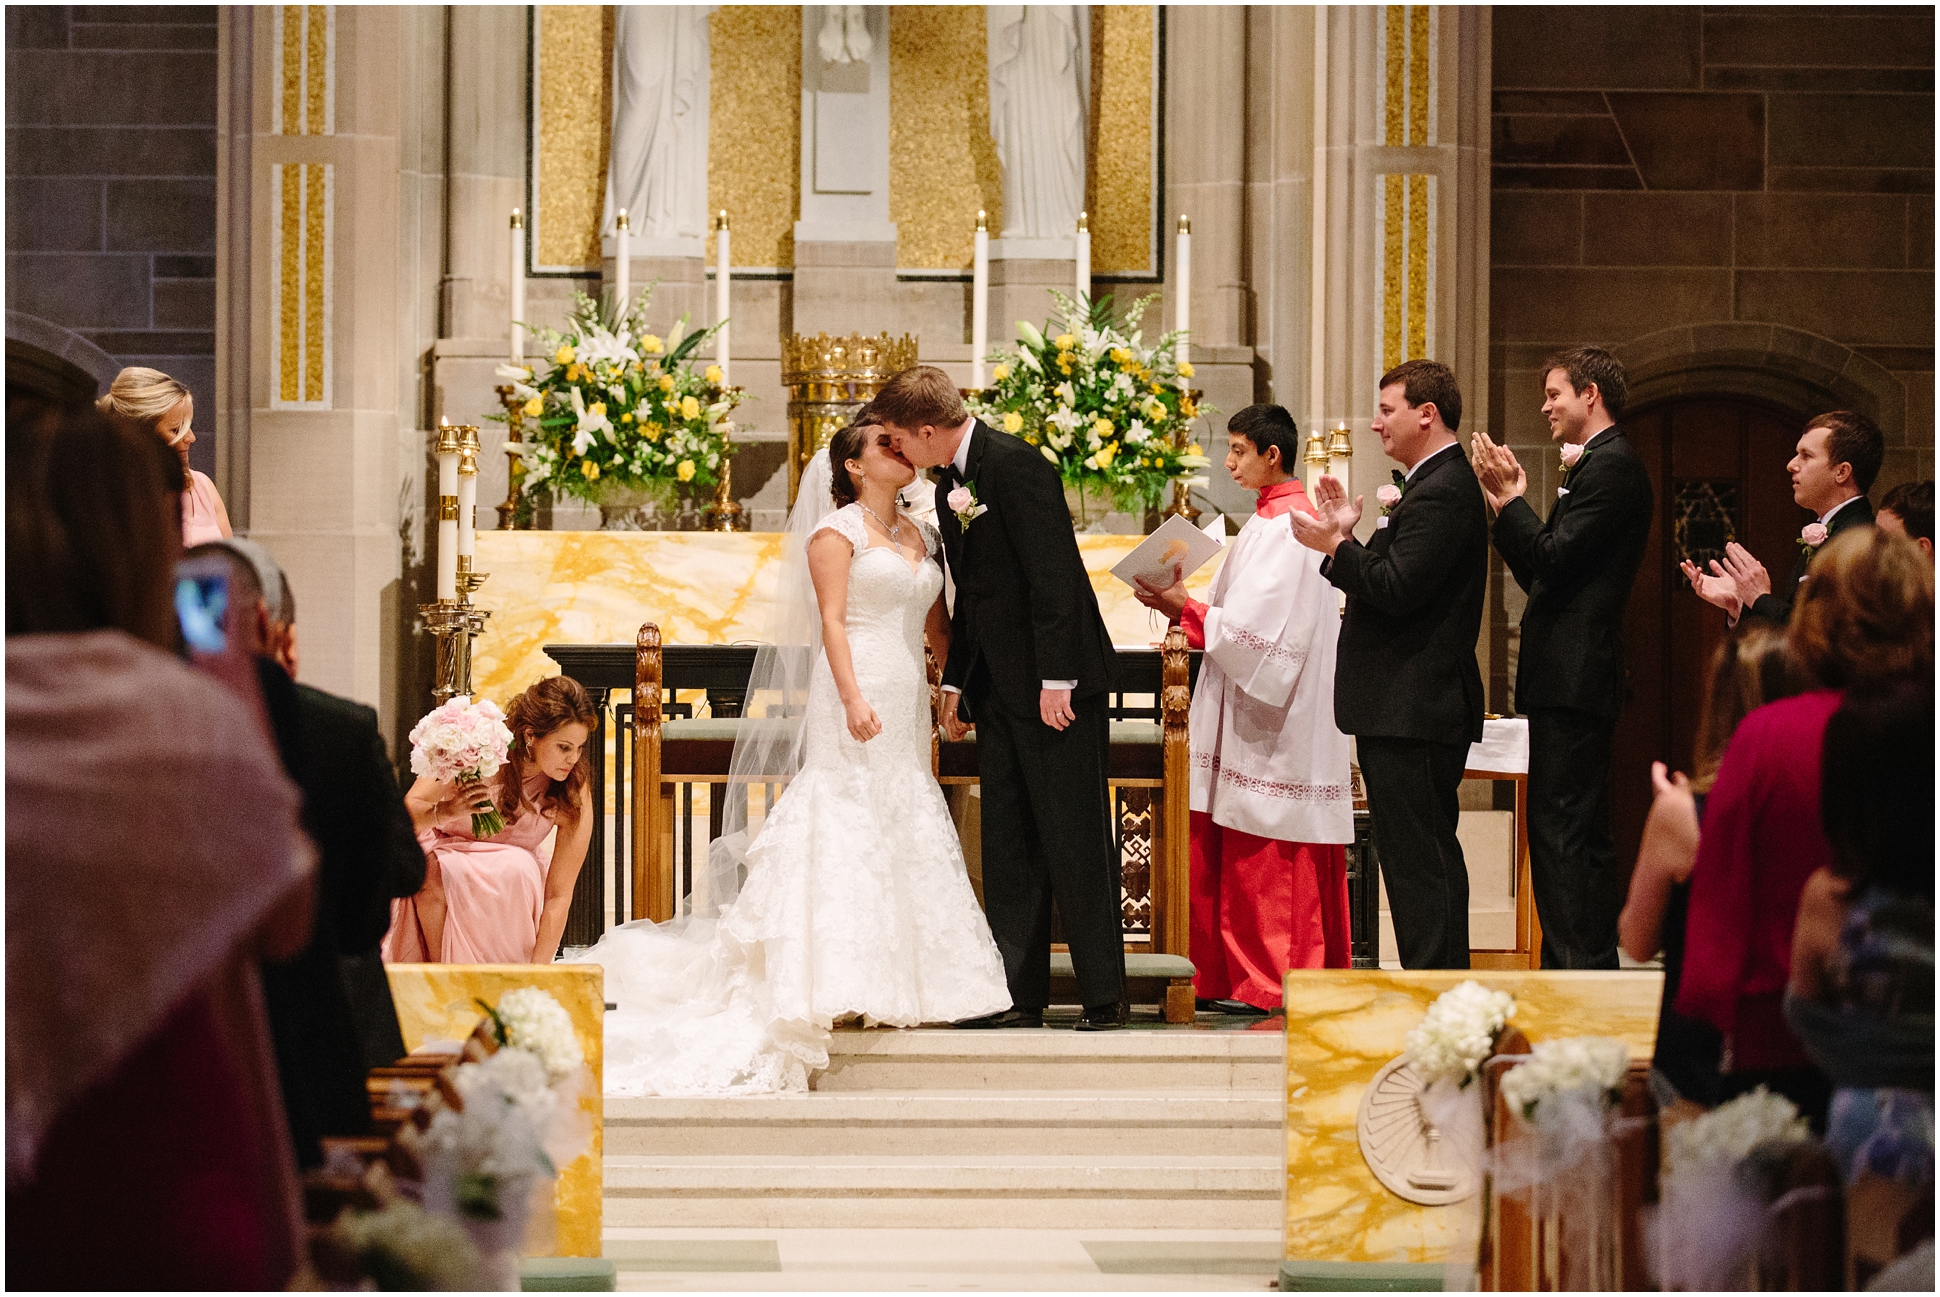 Two Chics Photography | Catholic Cathedral of Christ the King, Swanson House and Buckhead Club Wedding | www.twochicsphotography.com